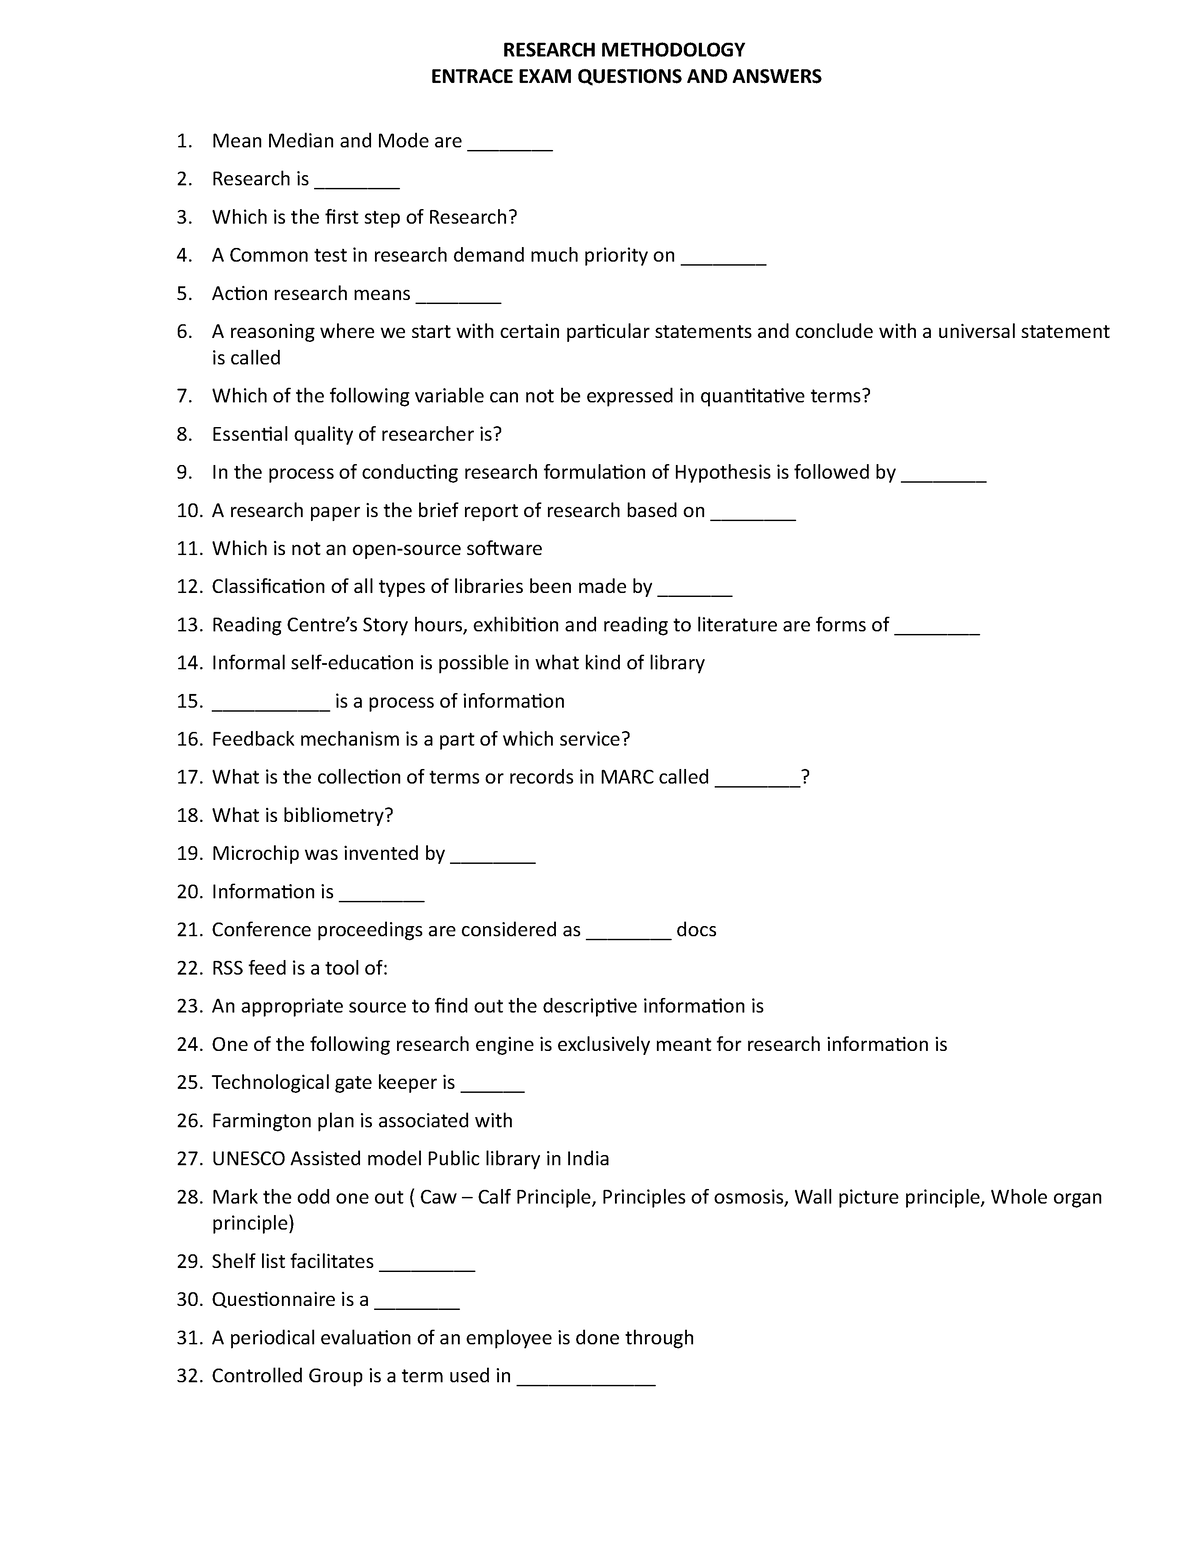 research methodology entrance questions